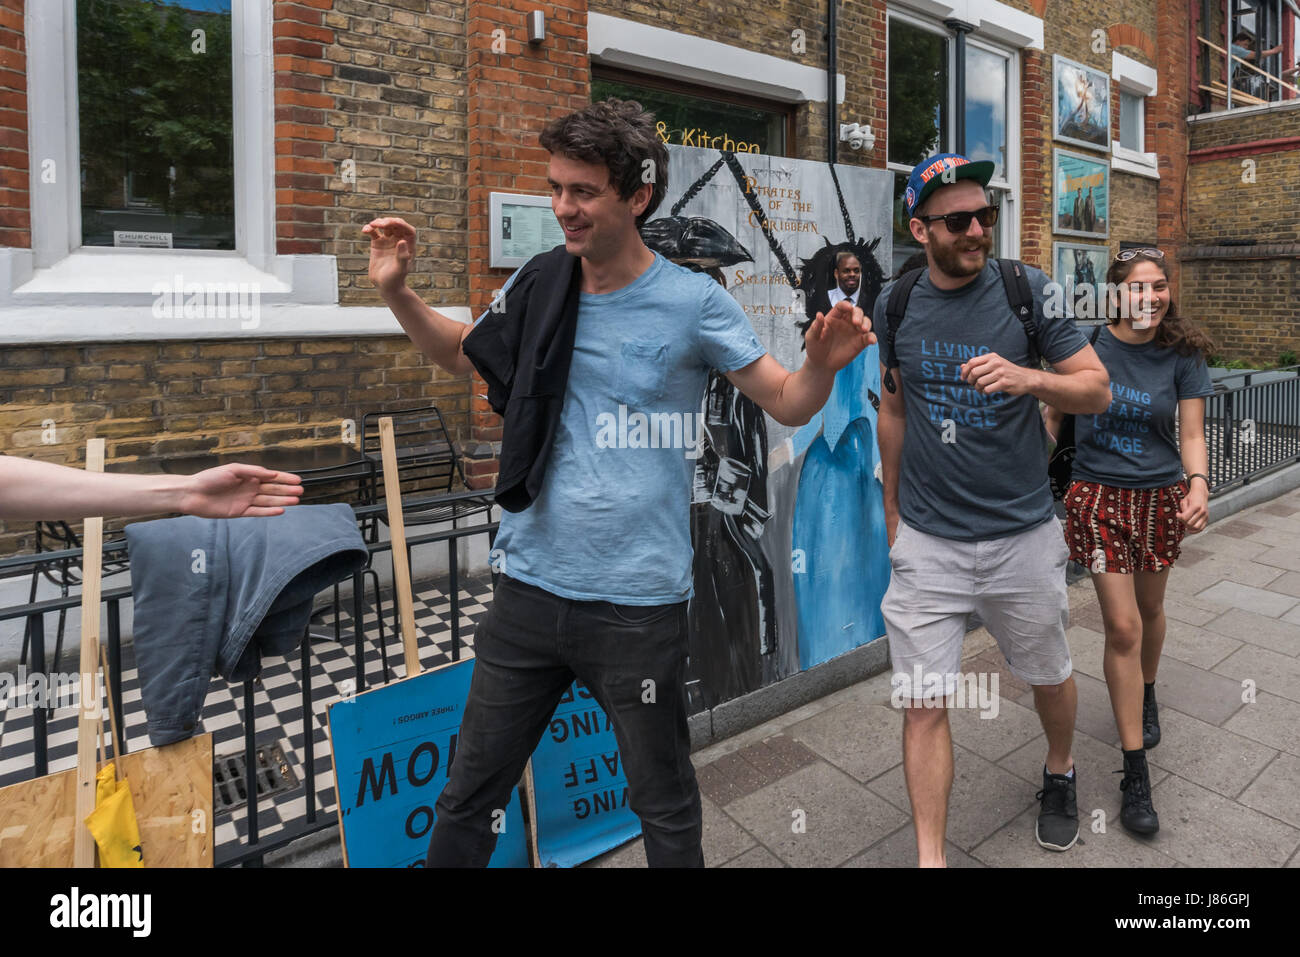 London, UK. 27th May, 2017. Workers walking out on strike from East Dulwich Picturehouse were greeted with cheers and applause from supporters. Supported by their union BECTU they demand trade union recognition, adequate sick pay, maternity and paternity pay and a living wage. Management at the company that made £93.8 million post-tax profit last year is refusing to meet with the workers. Credit: Peter Marshall/Alamy Live News Stock Photo